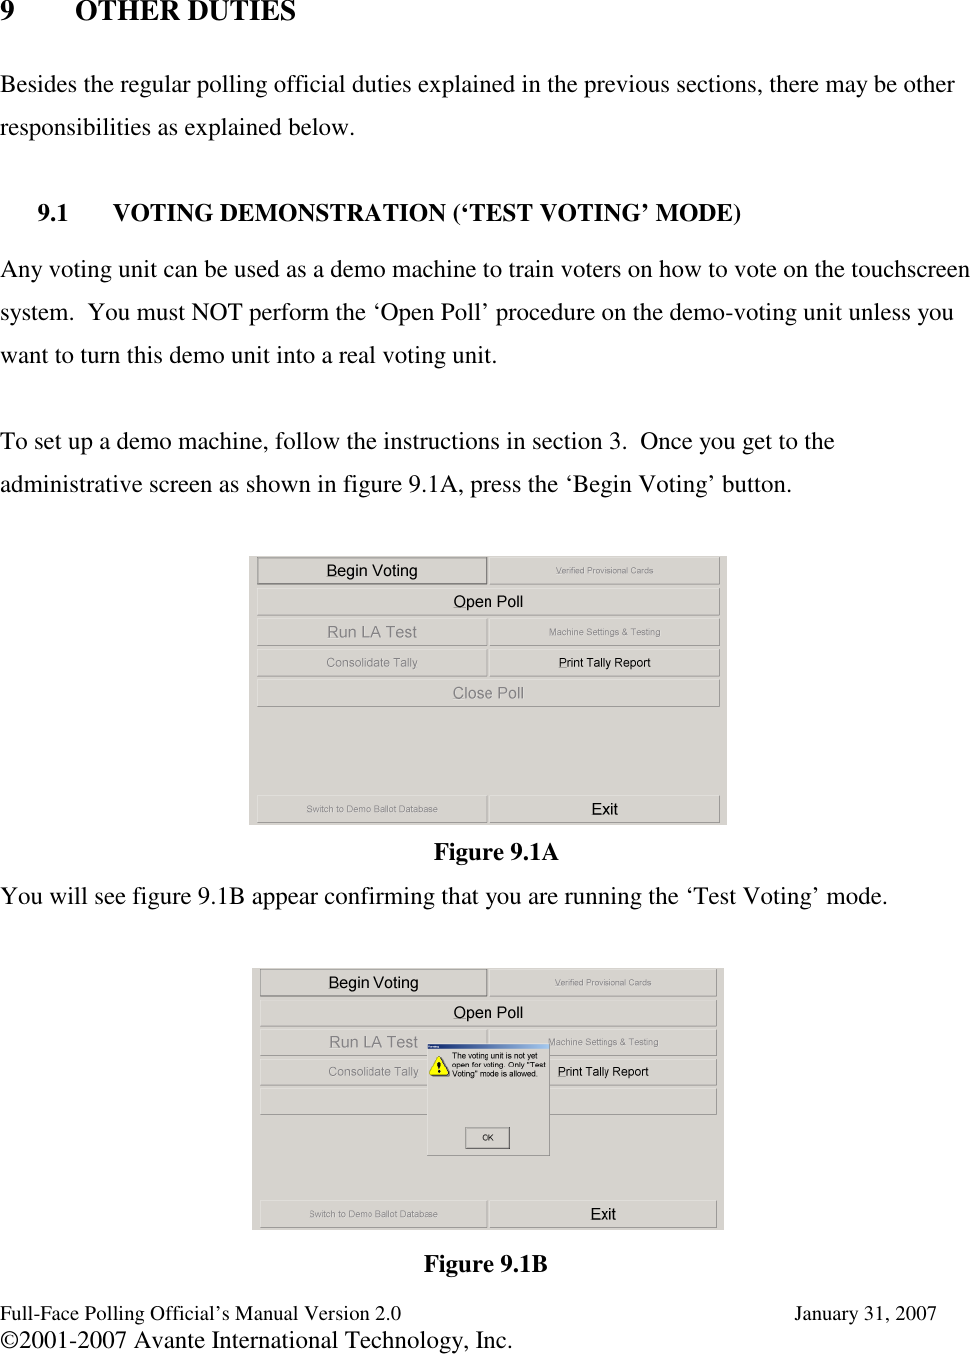 Full-Face Polling Official’s Manual Version 2.0 January 31, 2007©2001-2007 Avante International Technology, Inc.9 OTHER DUTIESBesides the regular polling official duties explained in the previous sections, there may be otherresponsibilities as explained below.9.1 VOTING DEMONSTRATION (‘TEST VOTING’ MODE)Any voting unit can be used as a demo machine to train voters on how to vote on the touchscreensystem. You must NOT perform the ‘Open Poll’ procedure on the demo-voting unit unless youwant to turn this demo unit into a real voting unit.To set up a demo machine, follow the instructions in section 3. Once you get to theadministrative screen as shown in figure 9.1A, press the ‘Begin Voting’ button.You will see figure 9.1B appear confirming that you are running the ‘Test Voting’ mode.Figure 9.1BFigure 9.1A